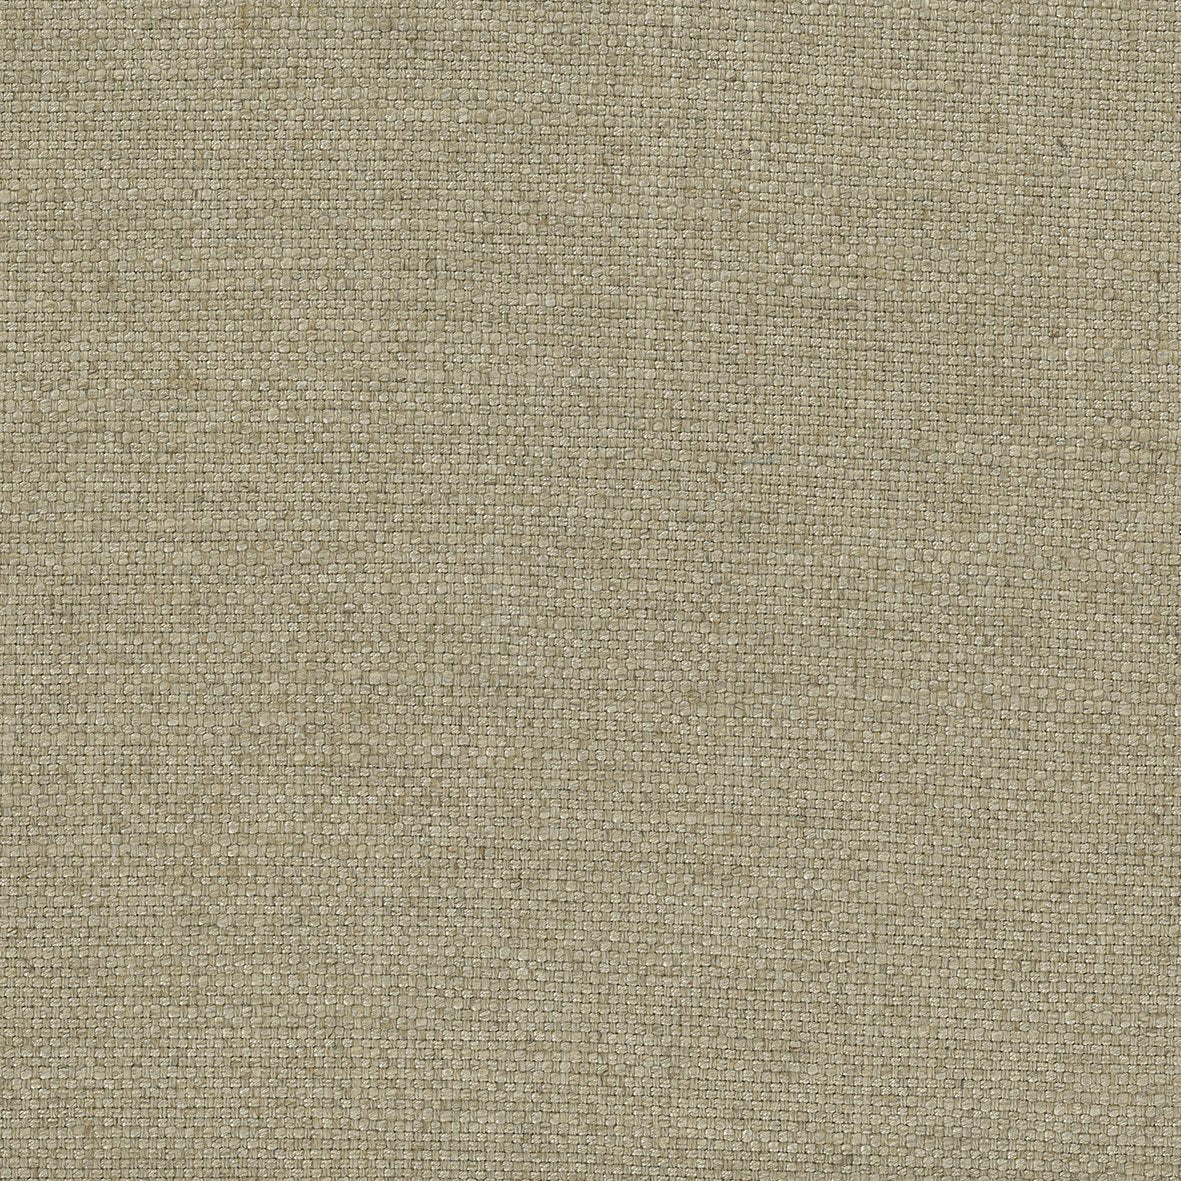 Nina Campbell Fabric - Poquelin Colette Beige NCF4312-05